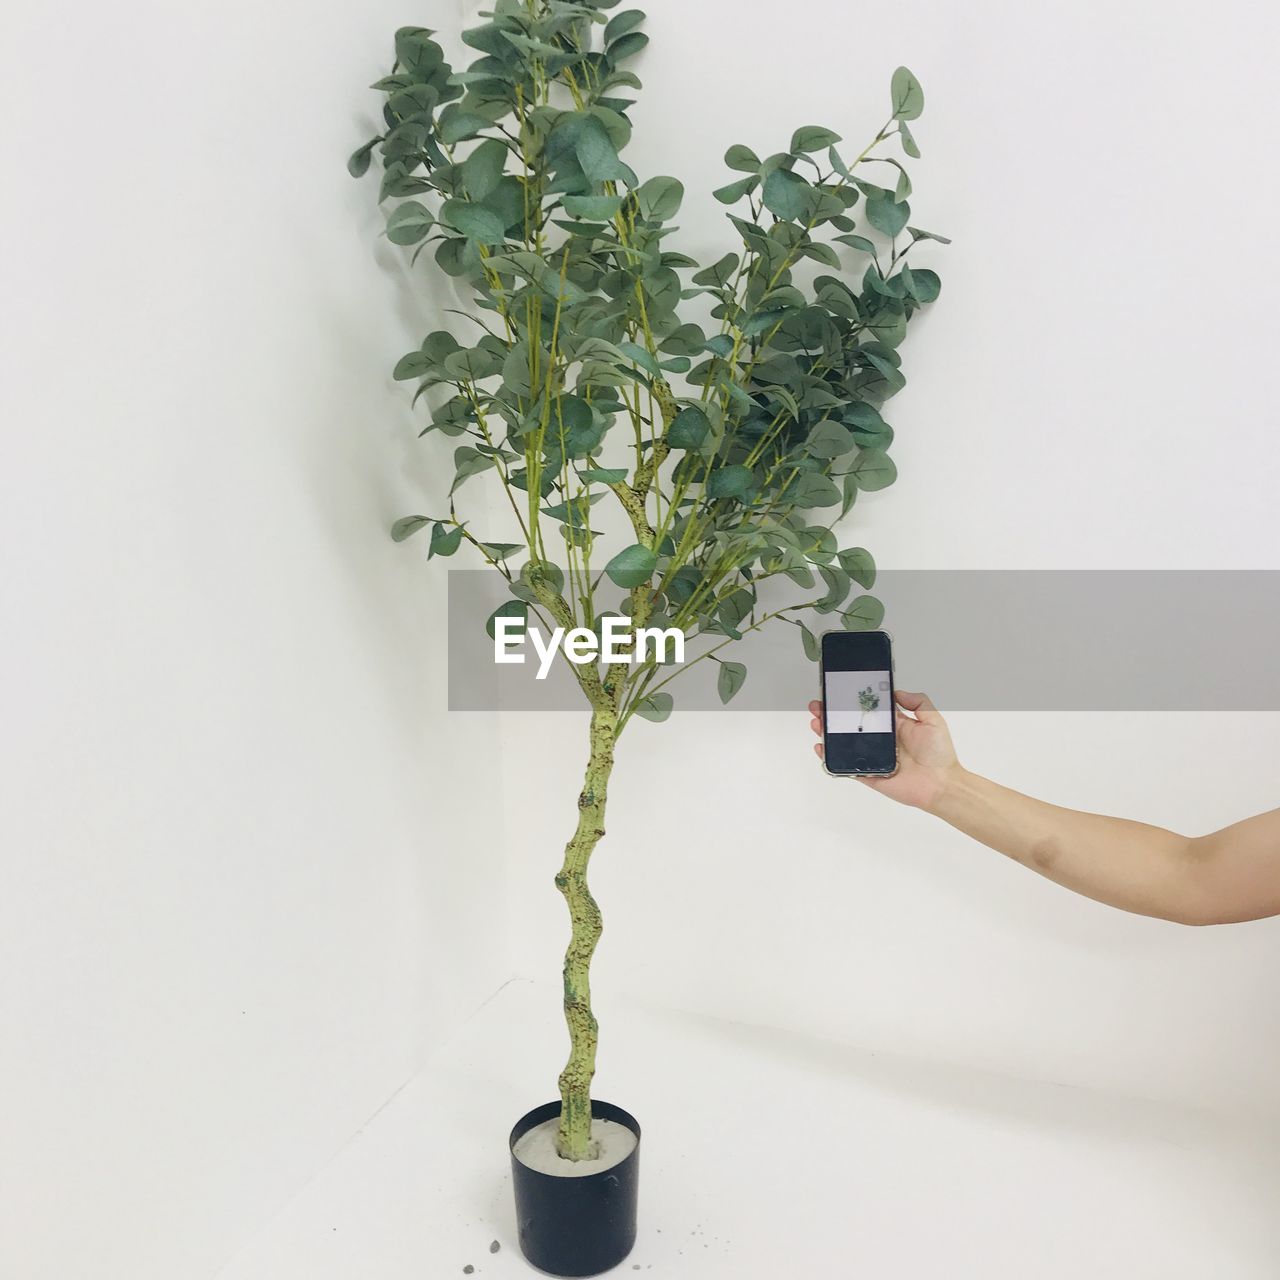 PERSON HOLDING PLANT AGAINST WHITE BACKGROUND